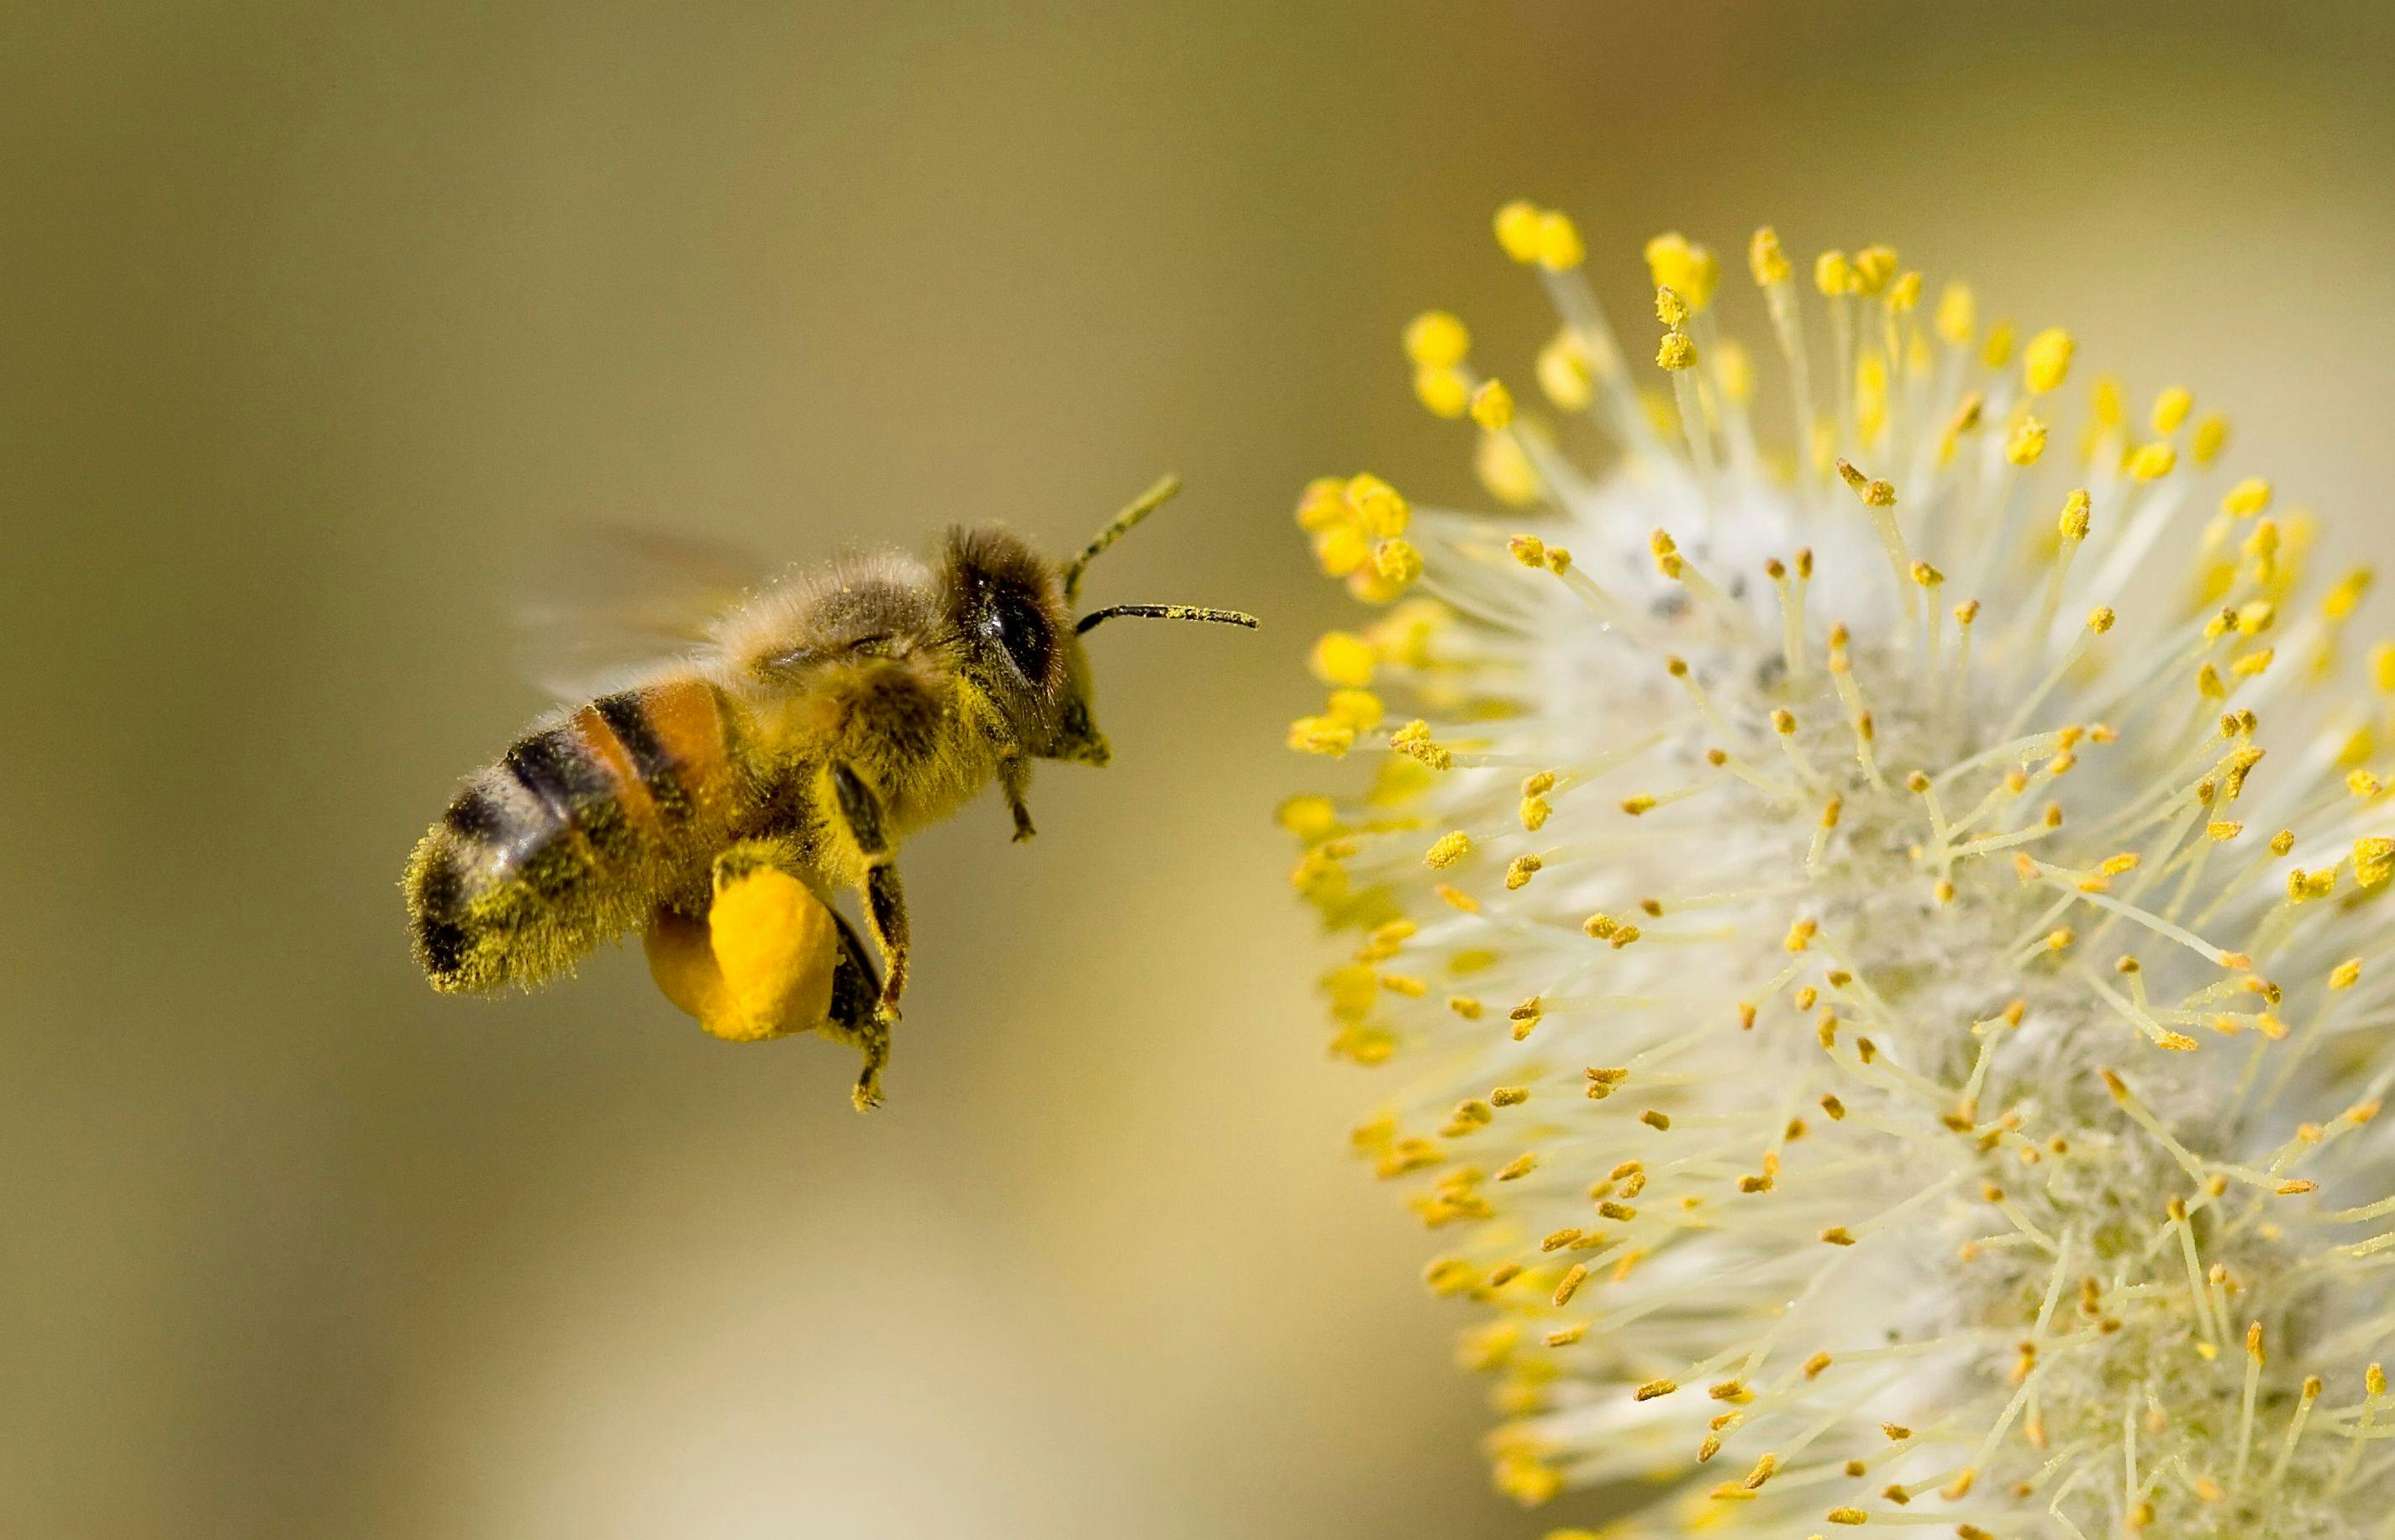 bee collecting pollen | Image Credit: Dave Massey - stock.adobe.com